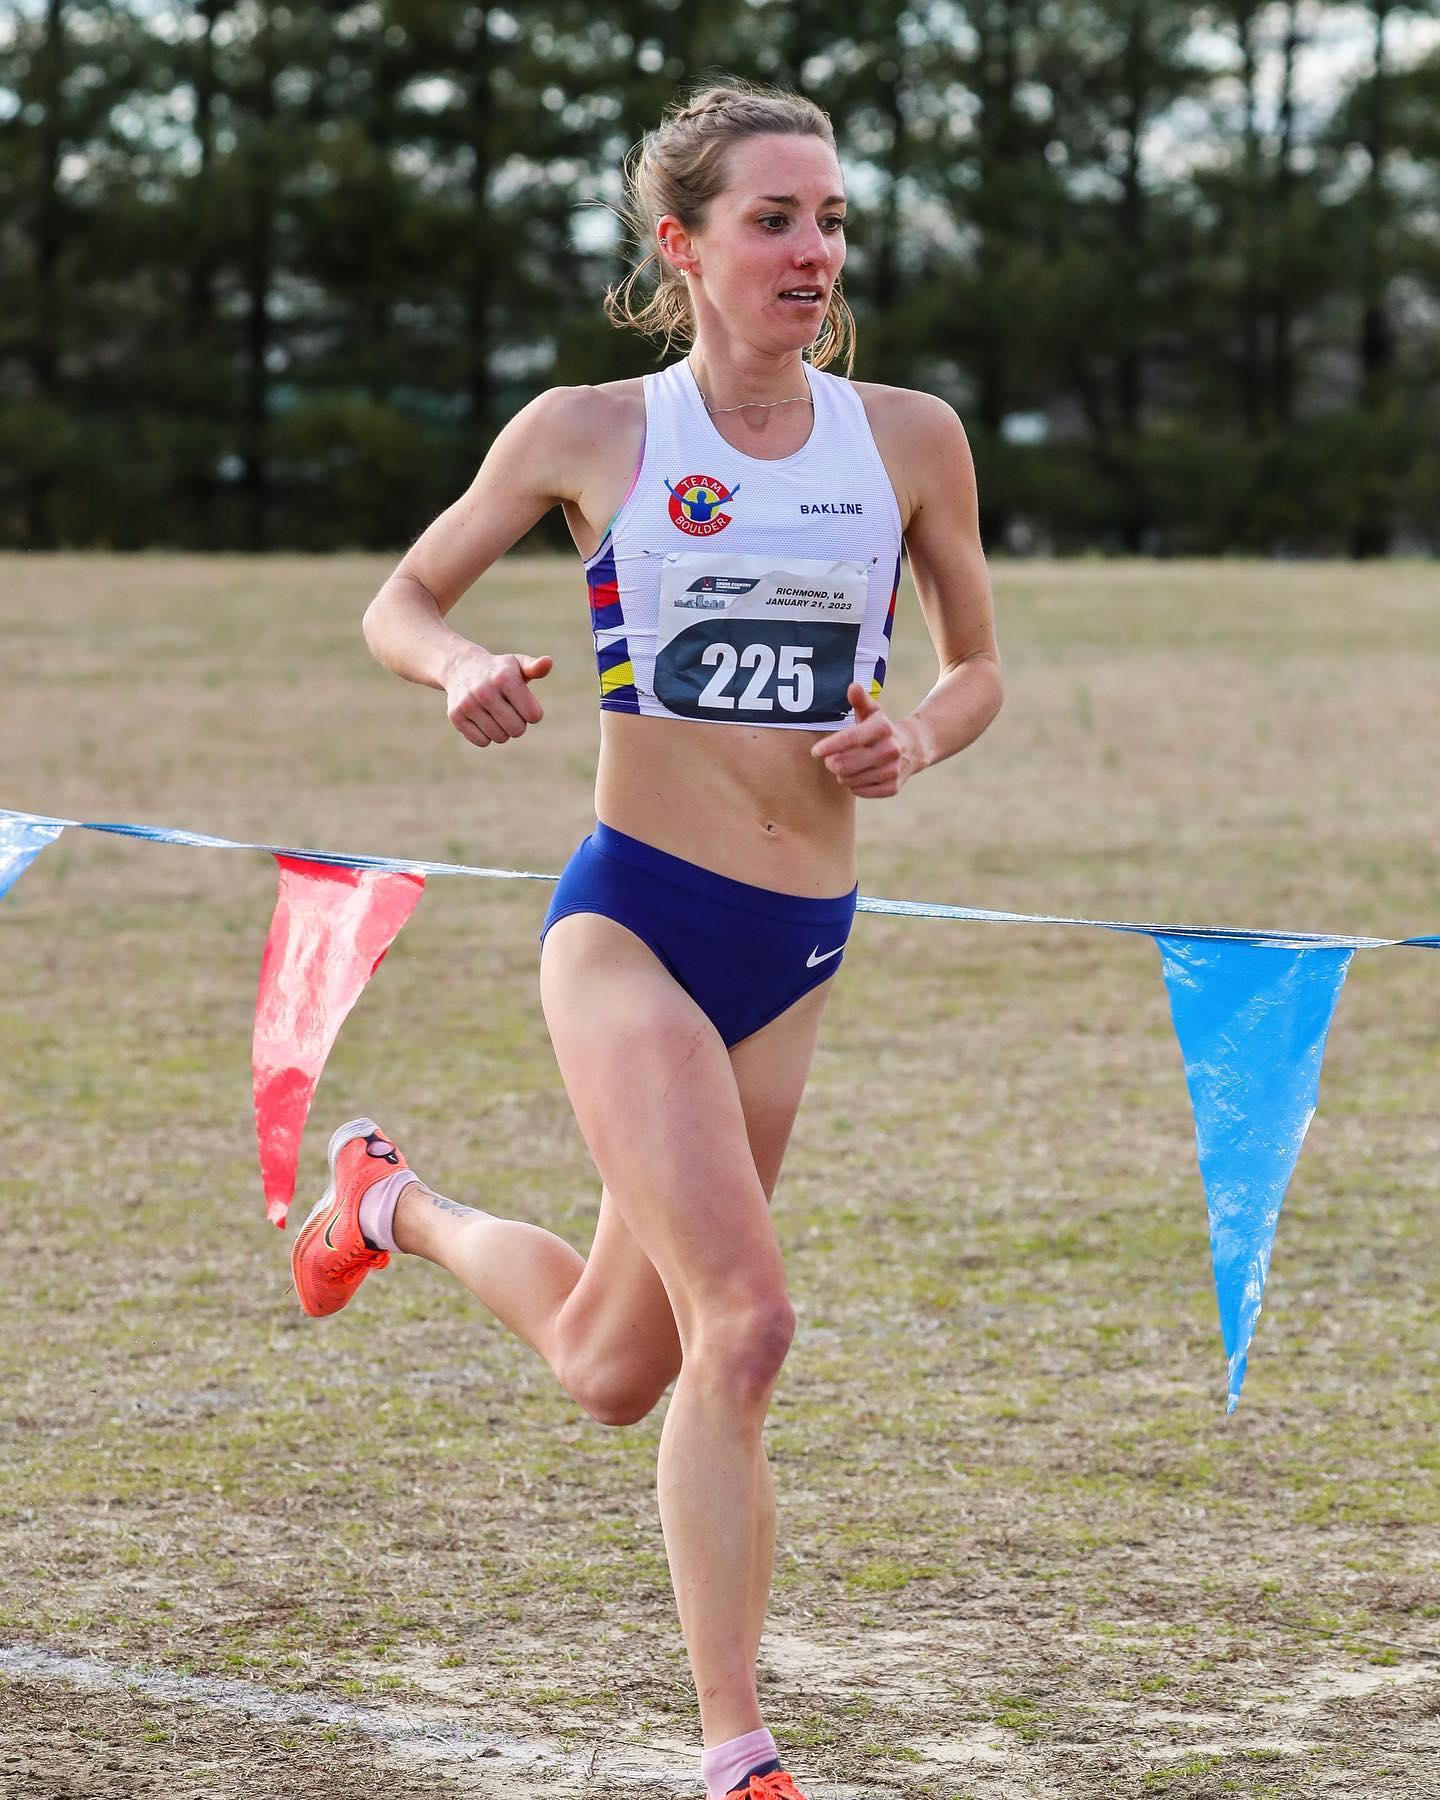 How Sub 32-Minute 10k Runner Carrie Verdon Fuels Training & Racing With Vafels